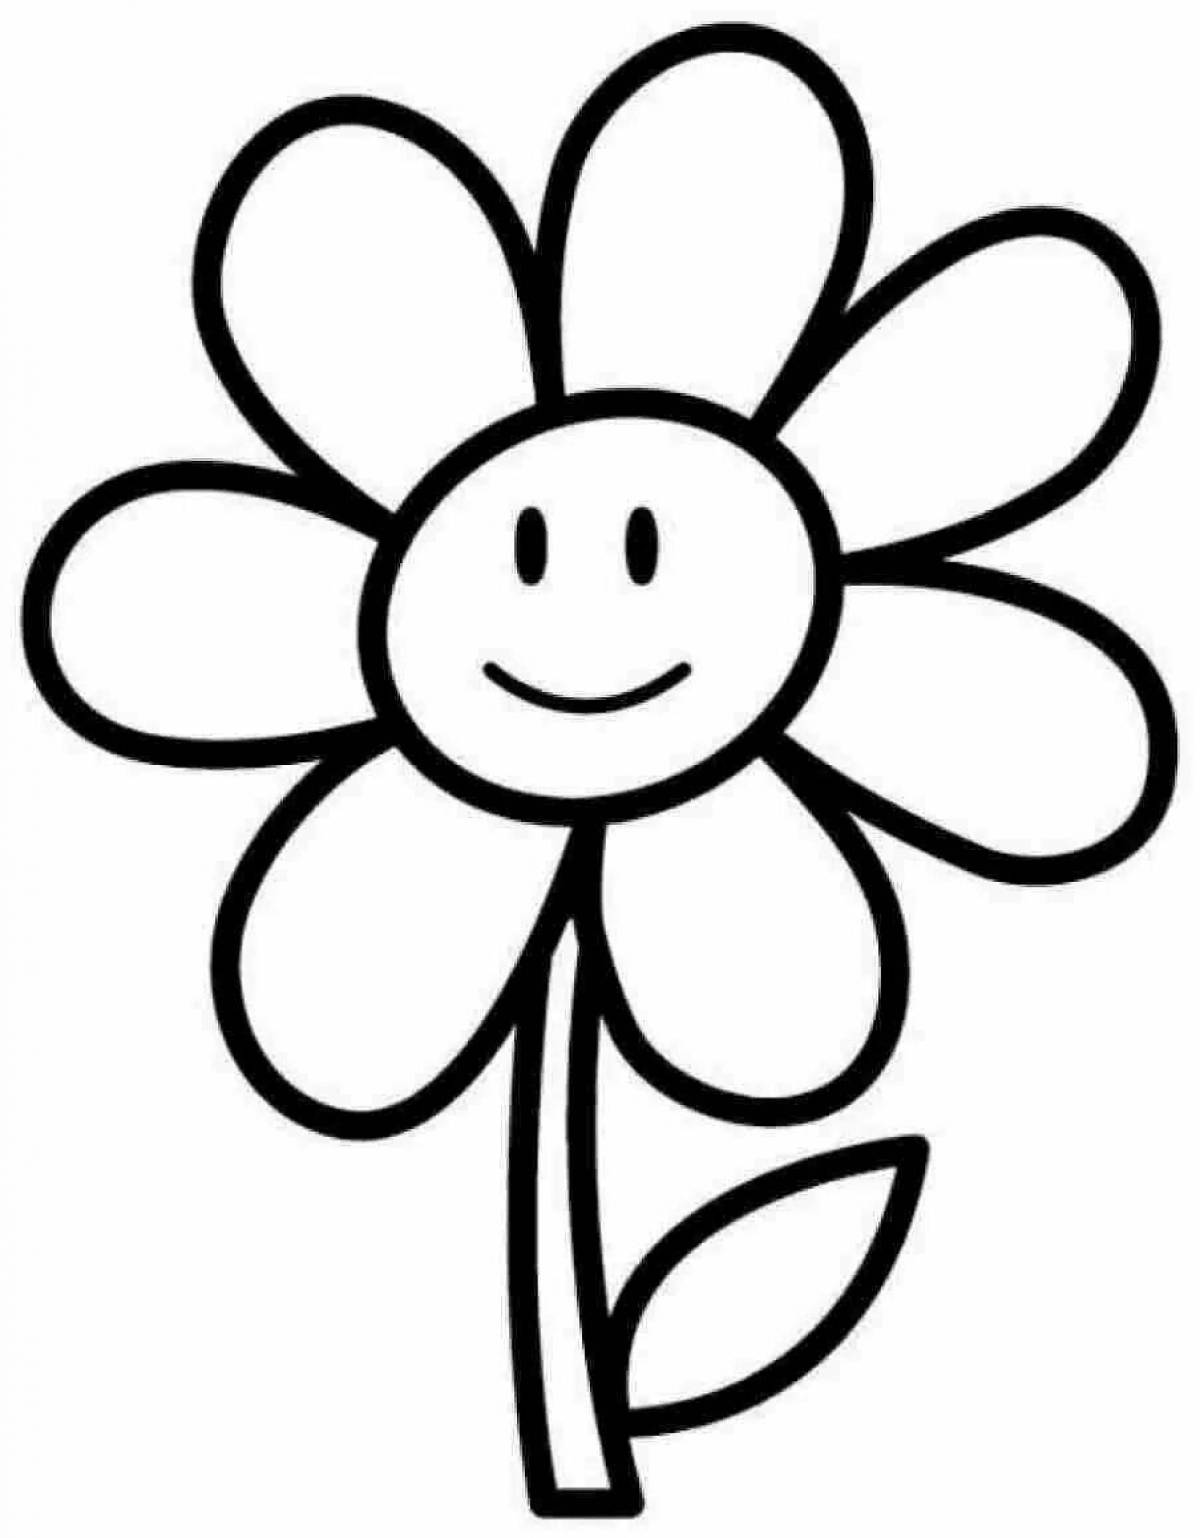 Great flowers coloring book for kids 3 4